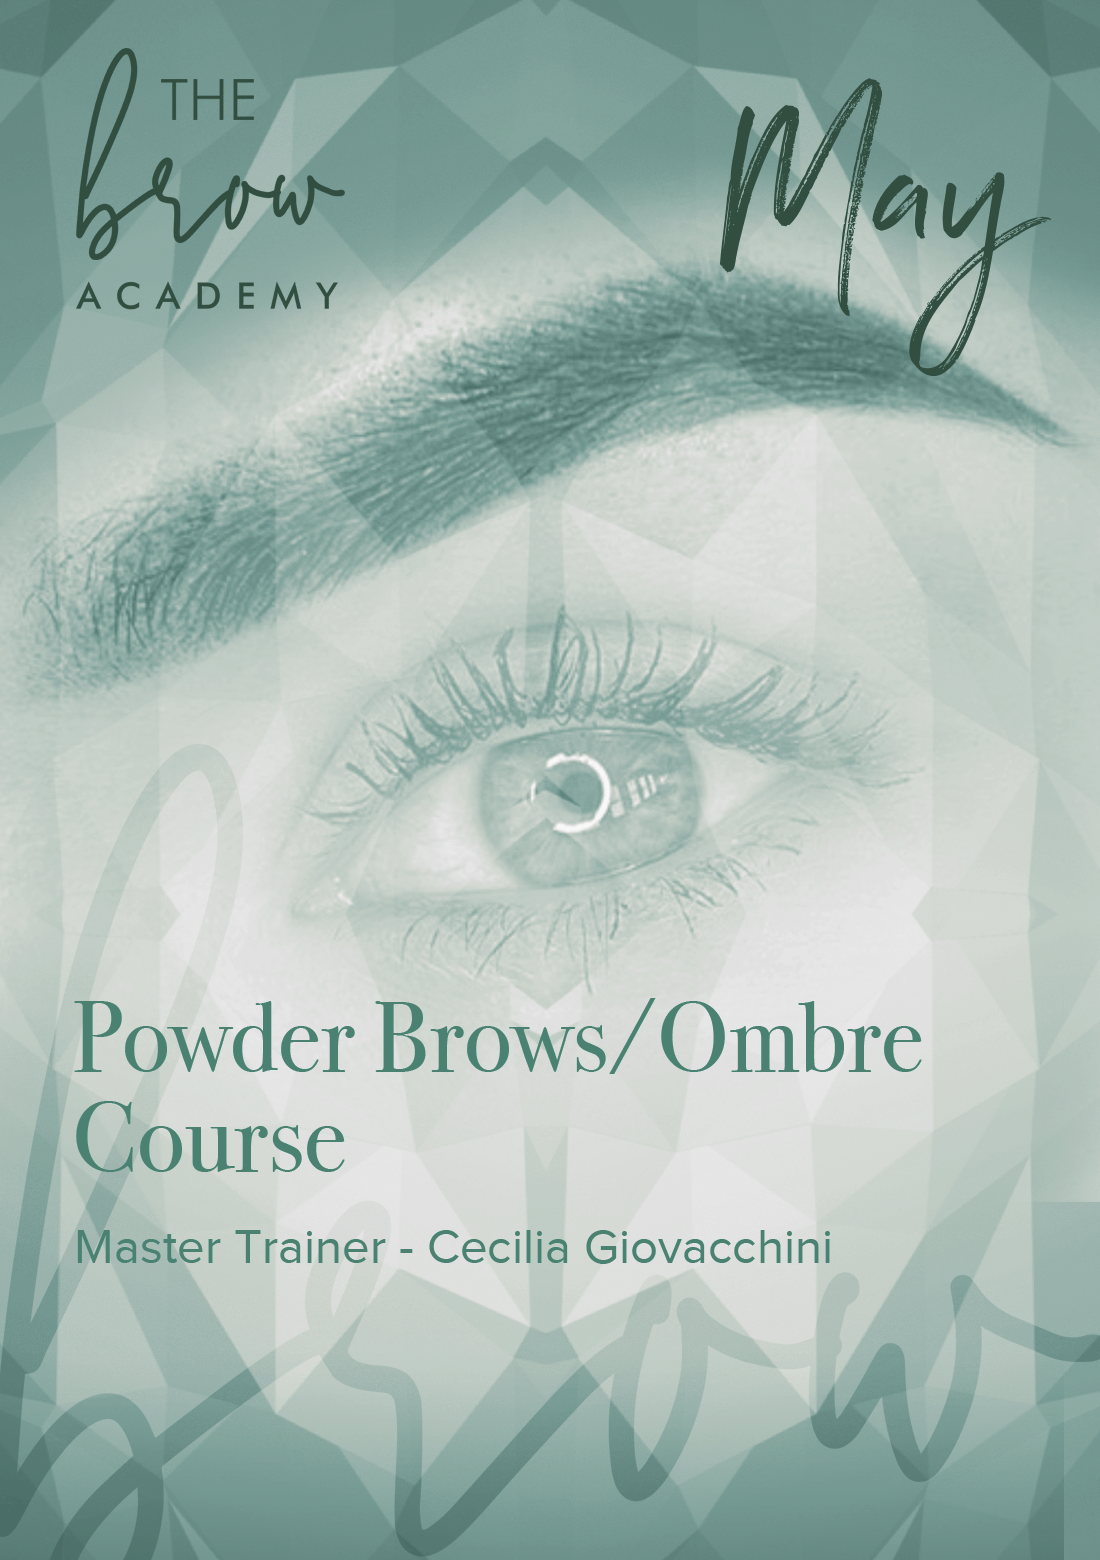 East Bay Powder Brows Ombre Courses - May